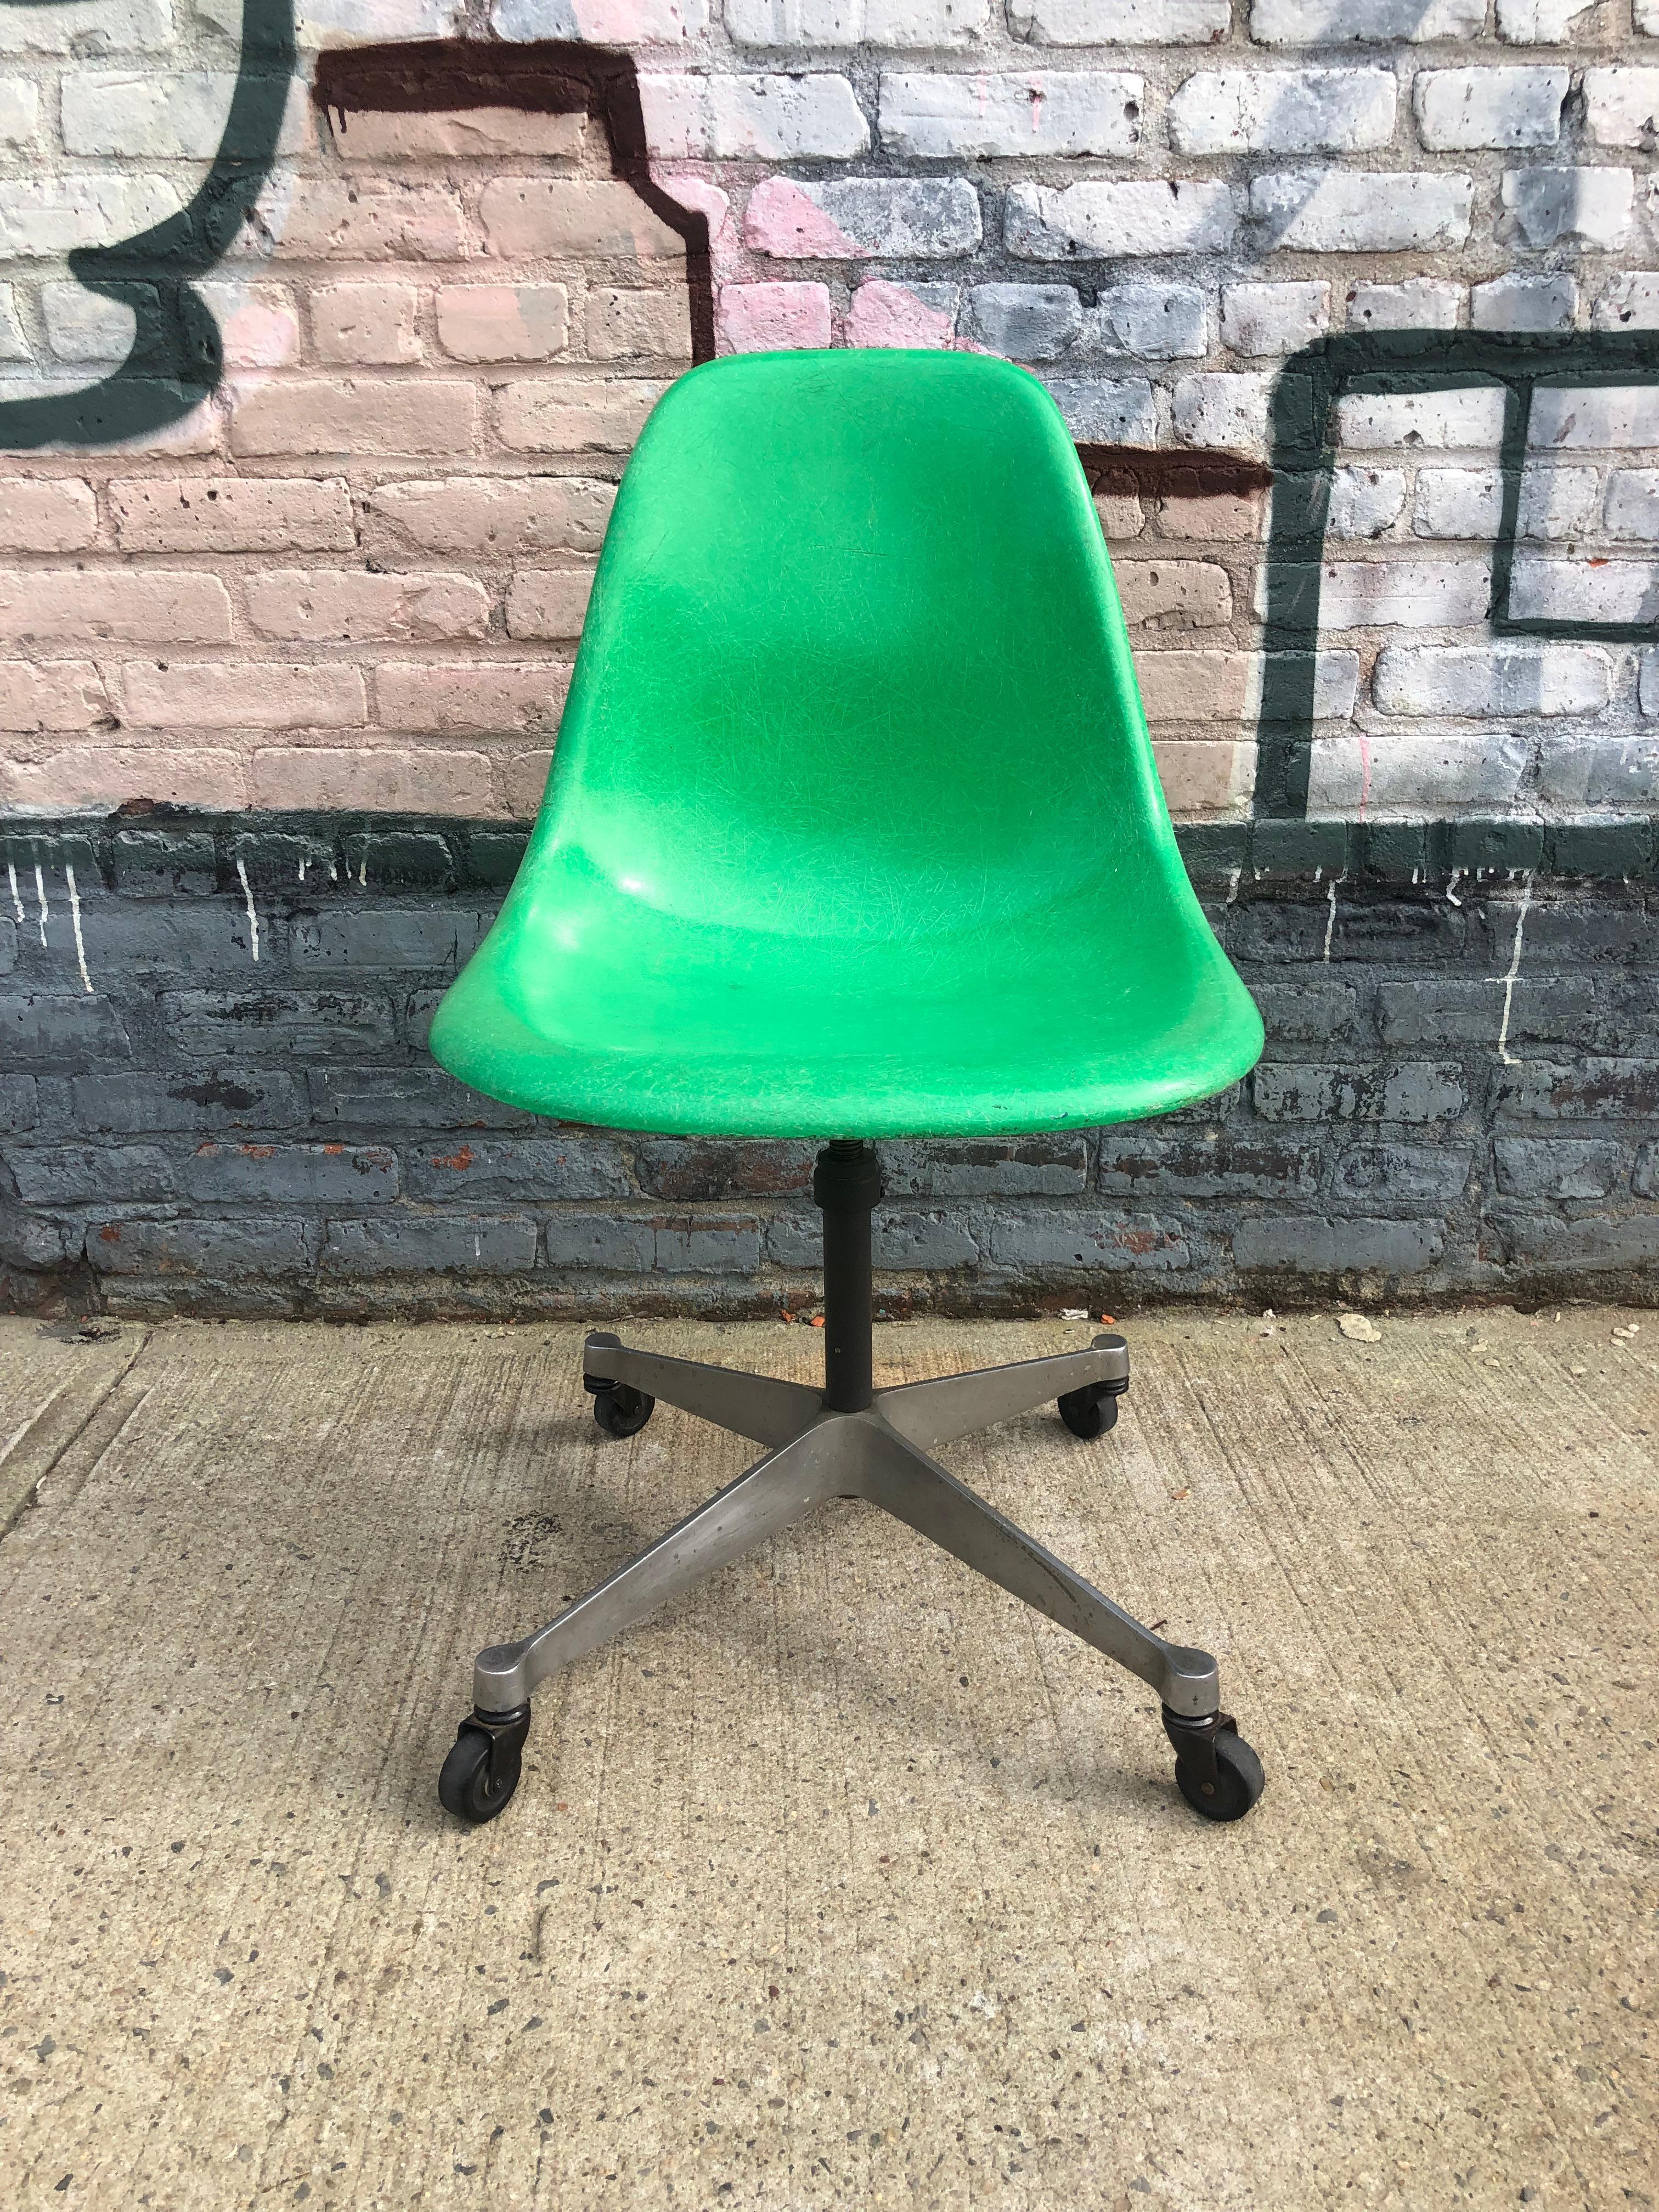 This is a very rare color green Eames desk chair. Features adjustable height swiveling base with wheels. Very comfortable to sit in for long periods. Signed with manufacturers stamp underneath.